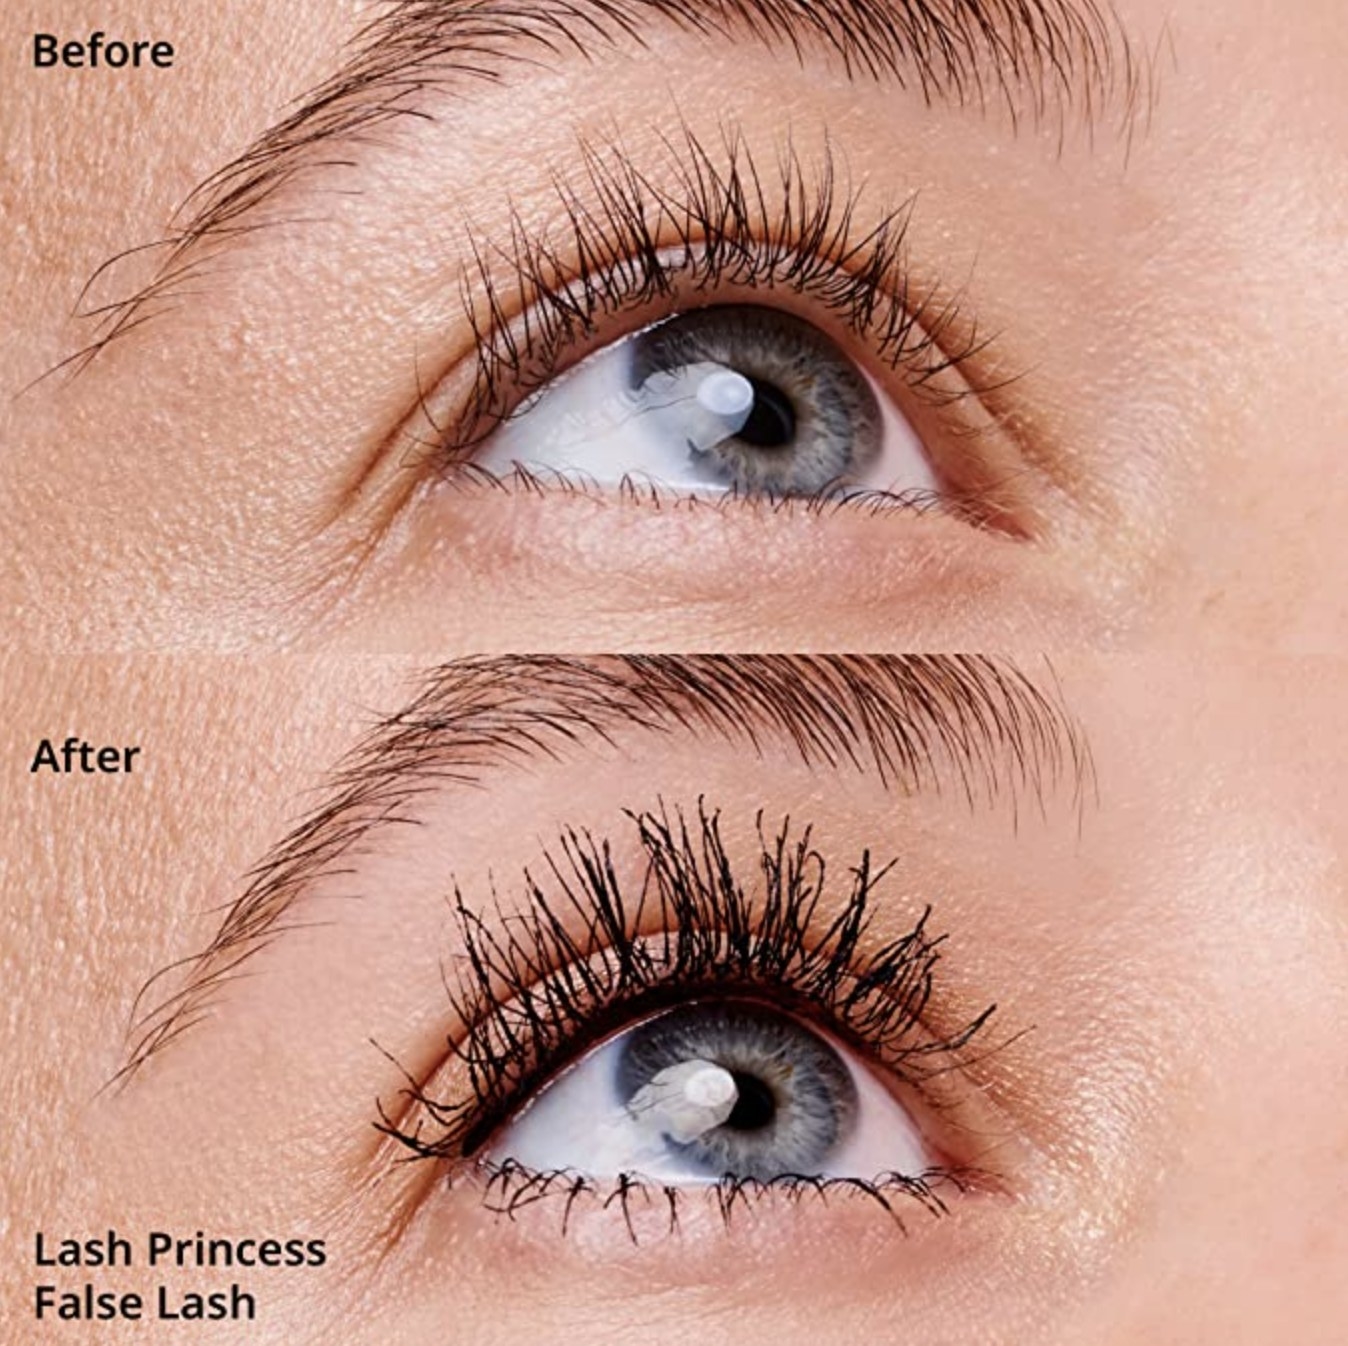 A before and after shot of someone with blue eyes wearing the mascara